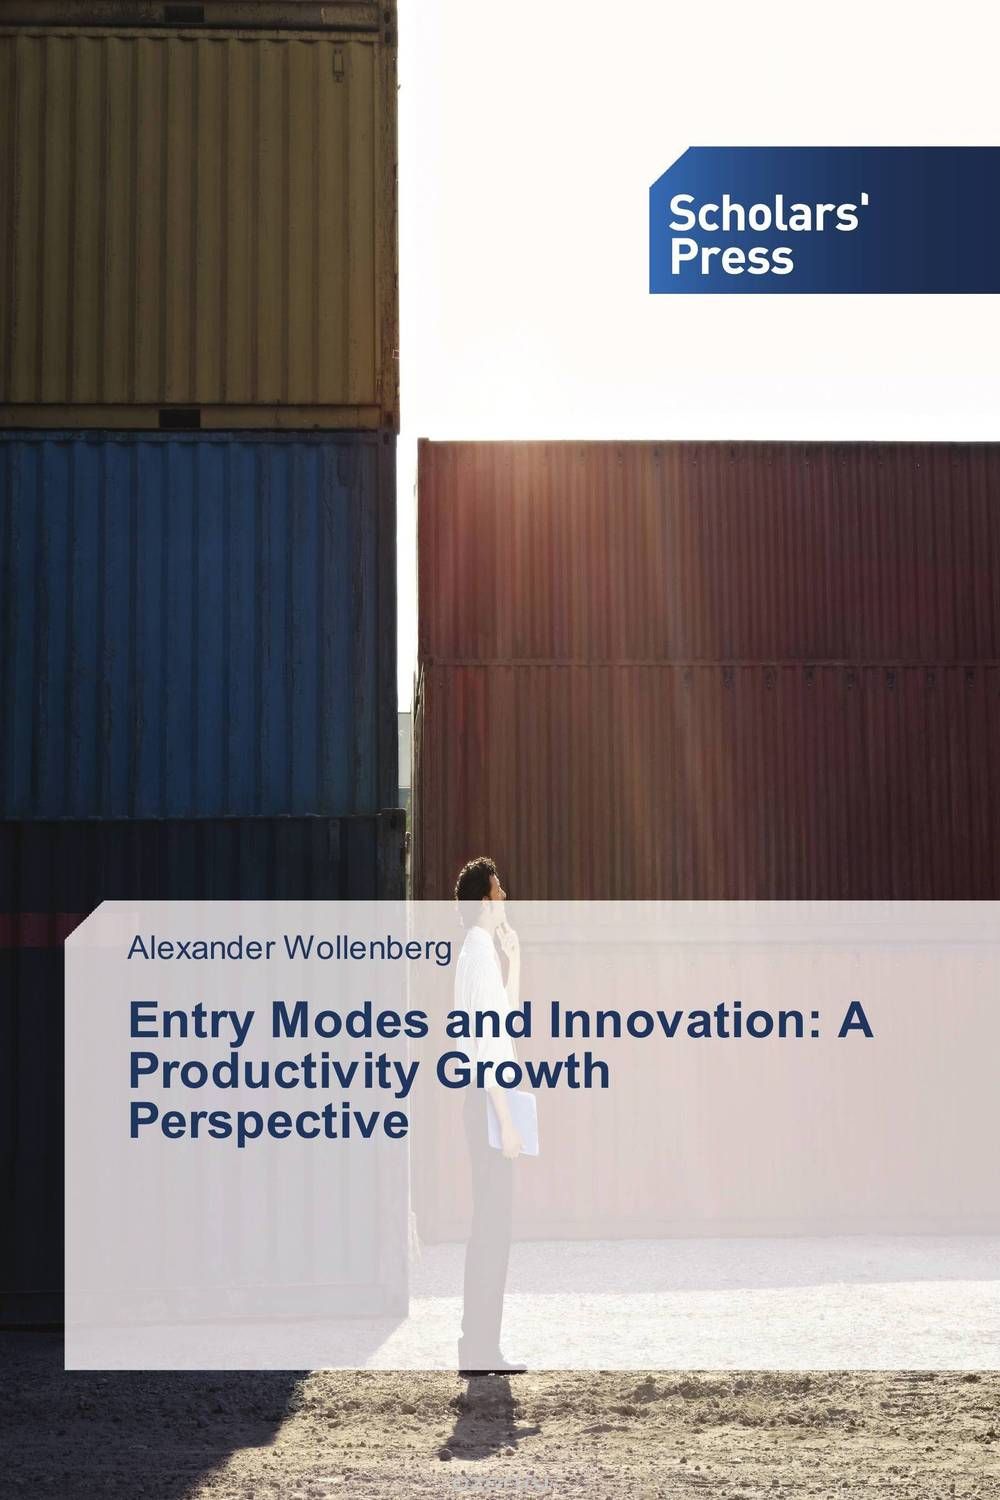 Entry Modes and Innovation: A Productivity Growth Perspective